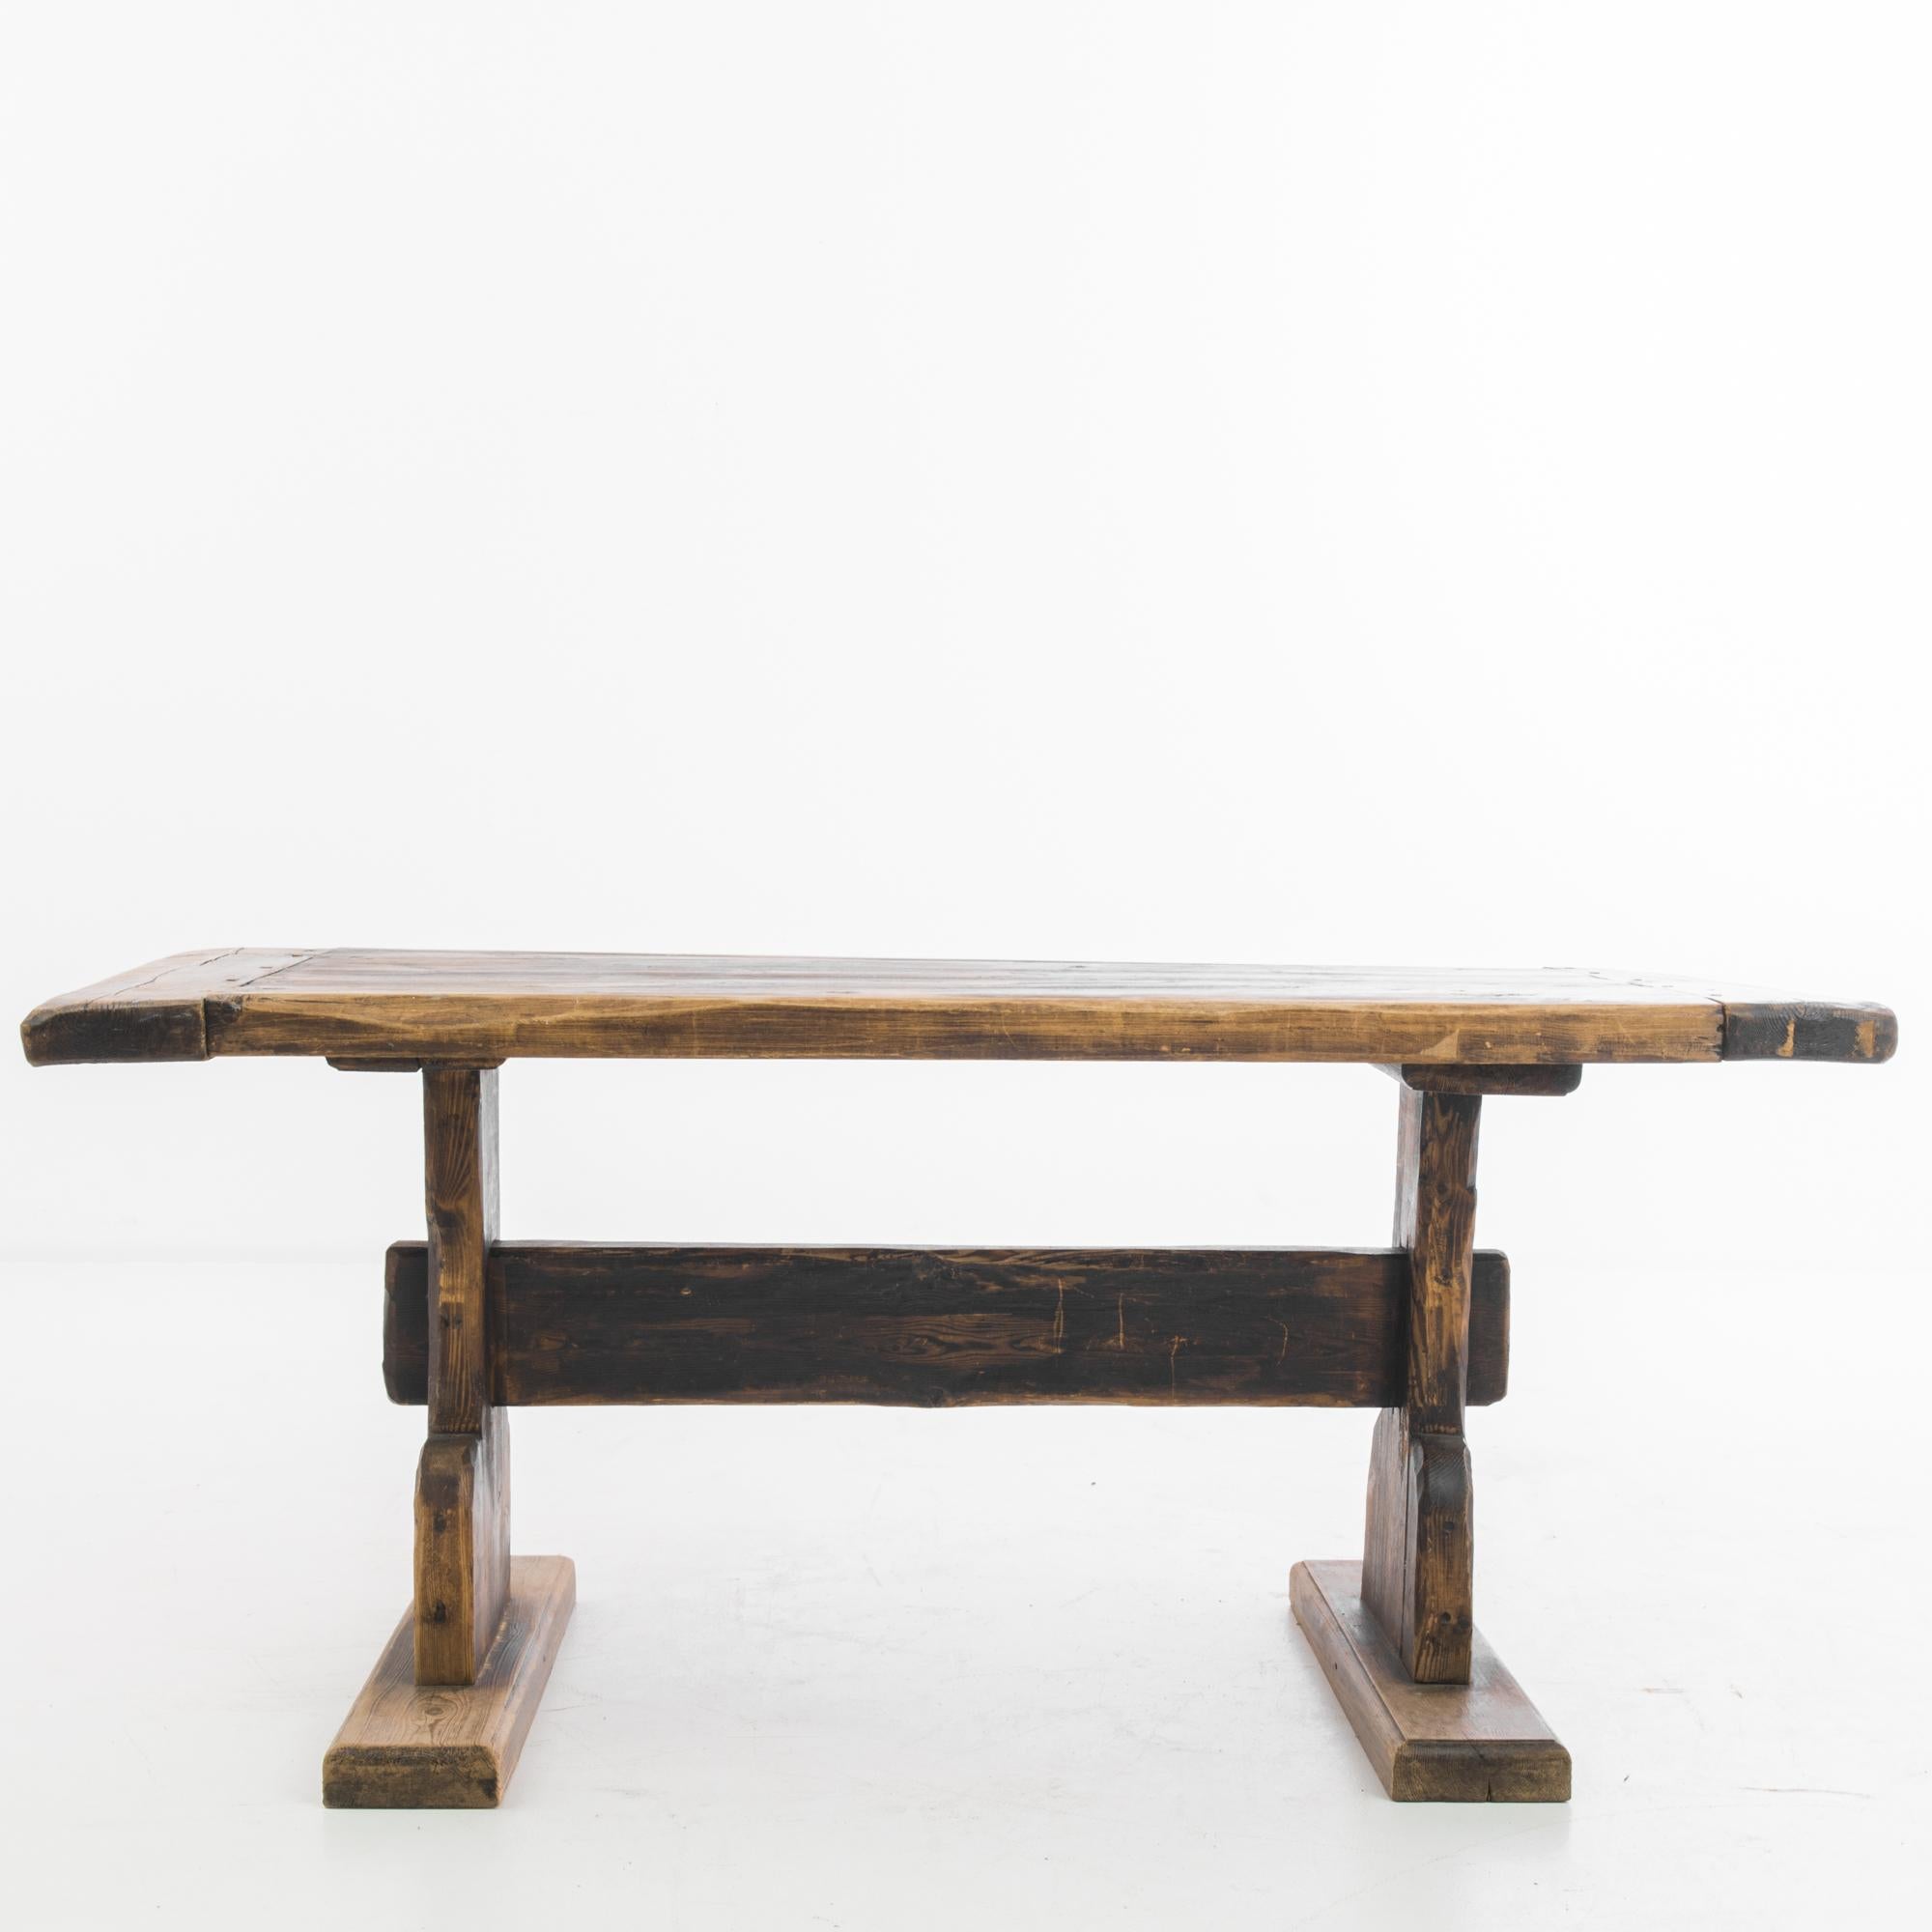 A wooden table from 1920s France. A rustic country silhouette with a dark, burnished finish. The broad slab of the tabletop rests upon two trestle legs, joined by a deep strut. The rough-hewn finish of the wood is mellowed by the warm color palette,